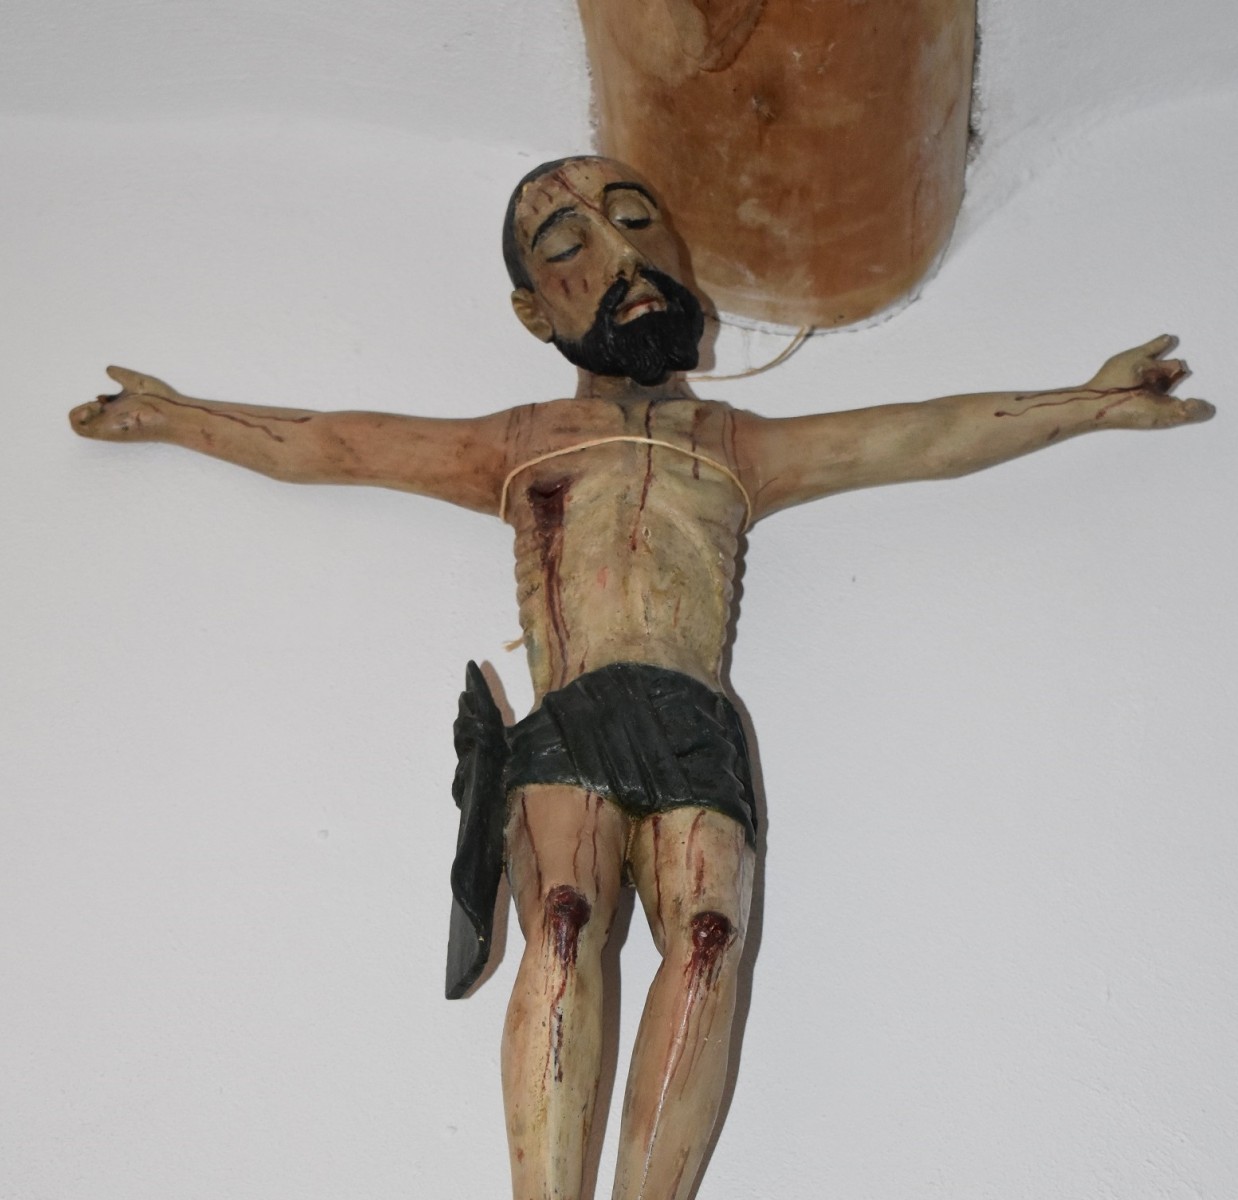 Artist Unknown. Crucifix. Wood. Collection, Taylor-Mesilla Historic Property.